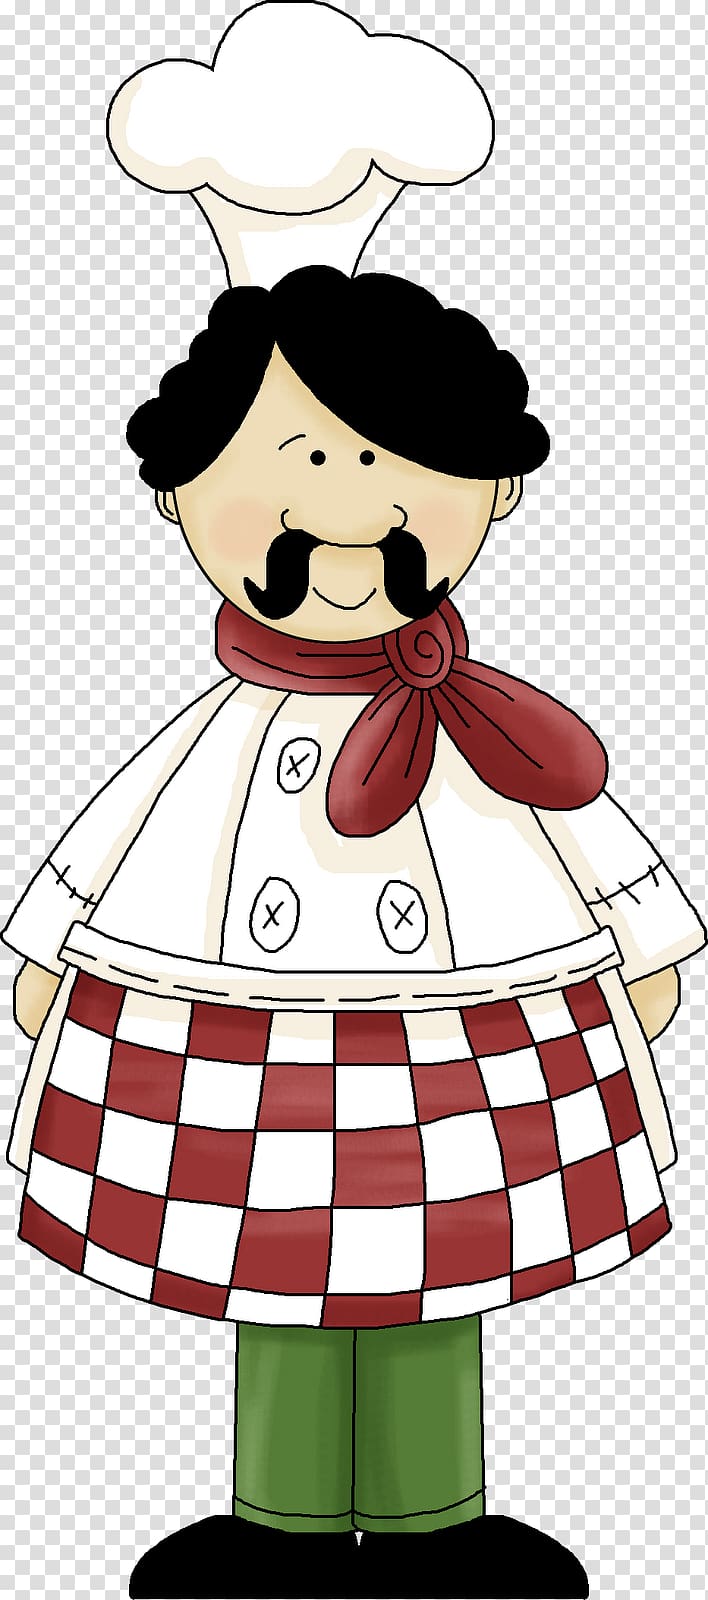 Cooking clipart guy italian, Cooking guy italian Transparent